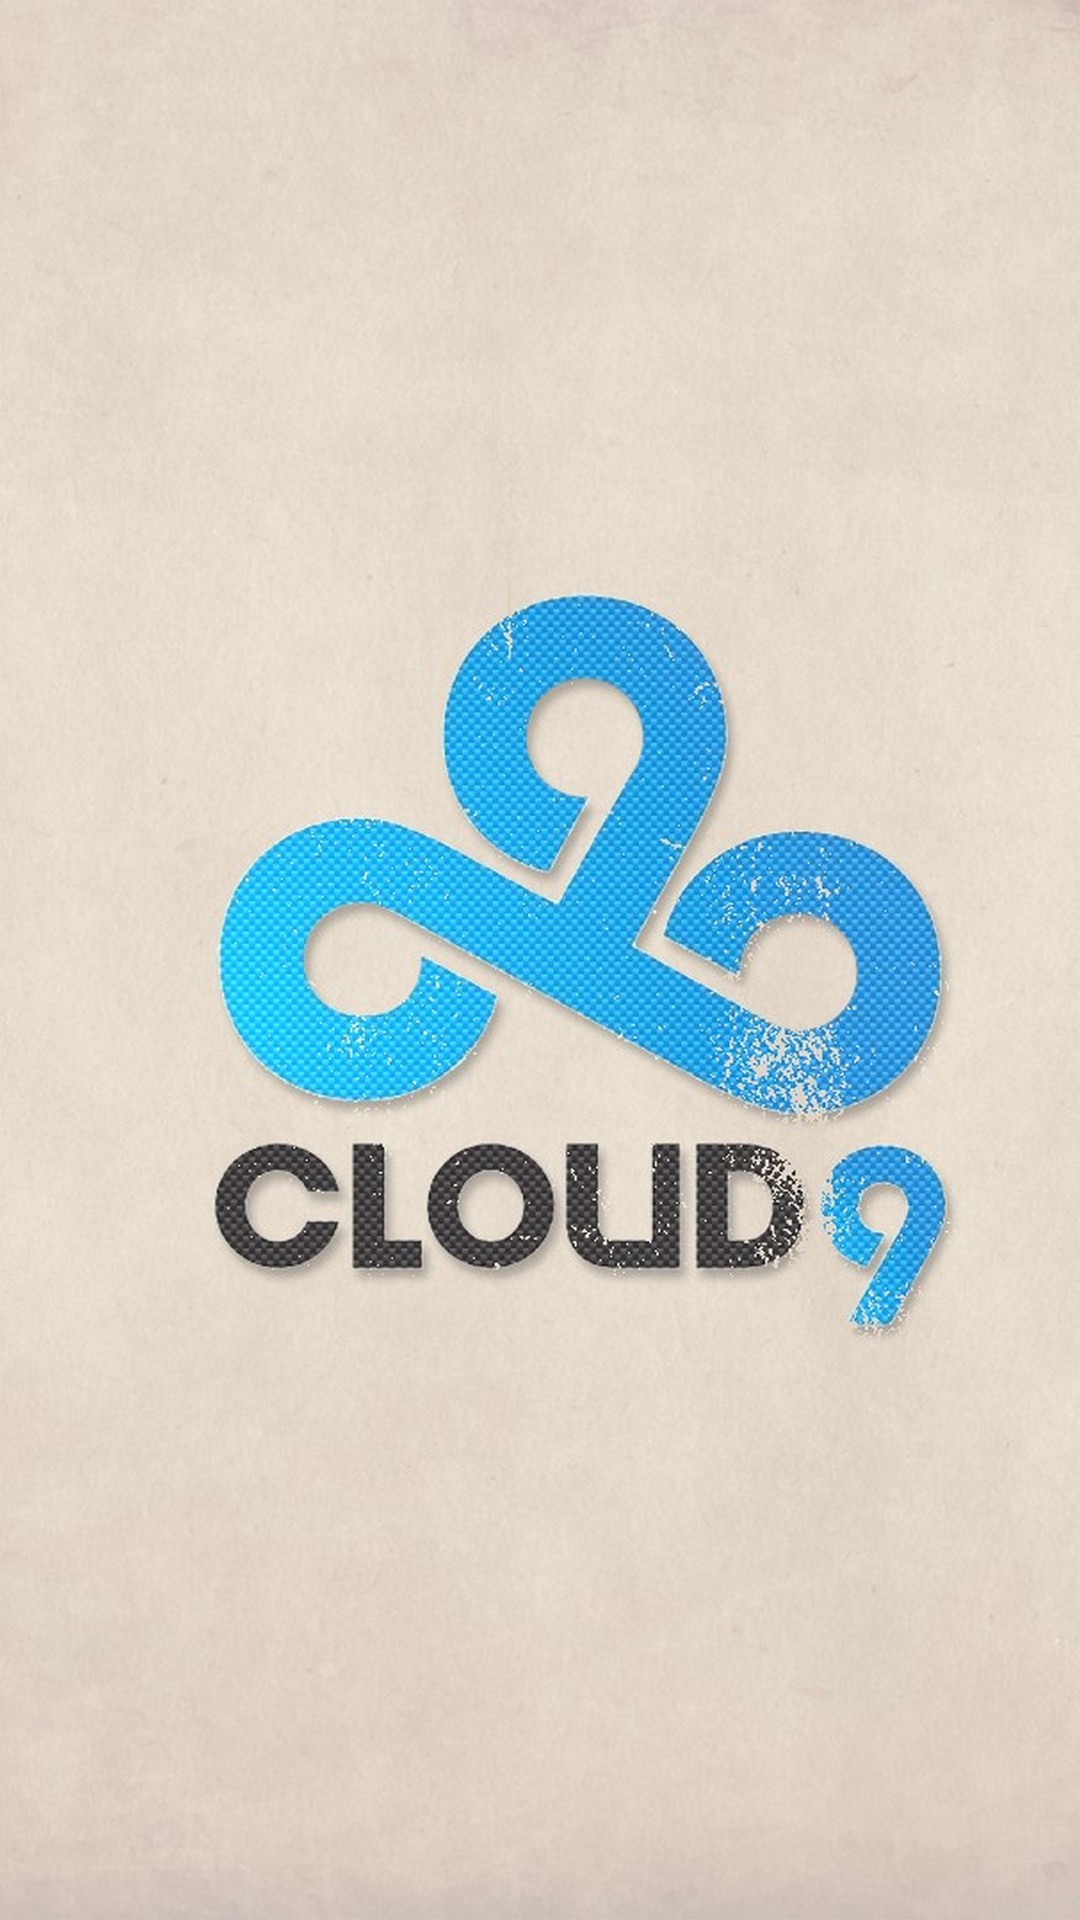 iPhone X Wallpaper Cloud 9 Games with HD Resolution 1080X1920